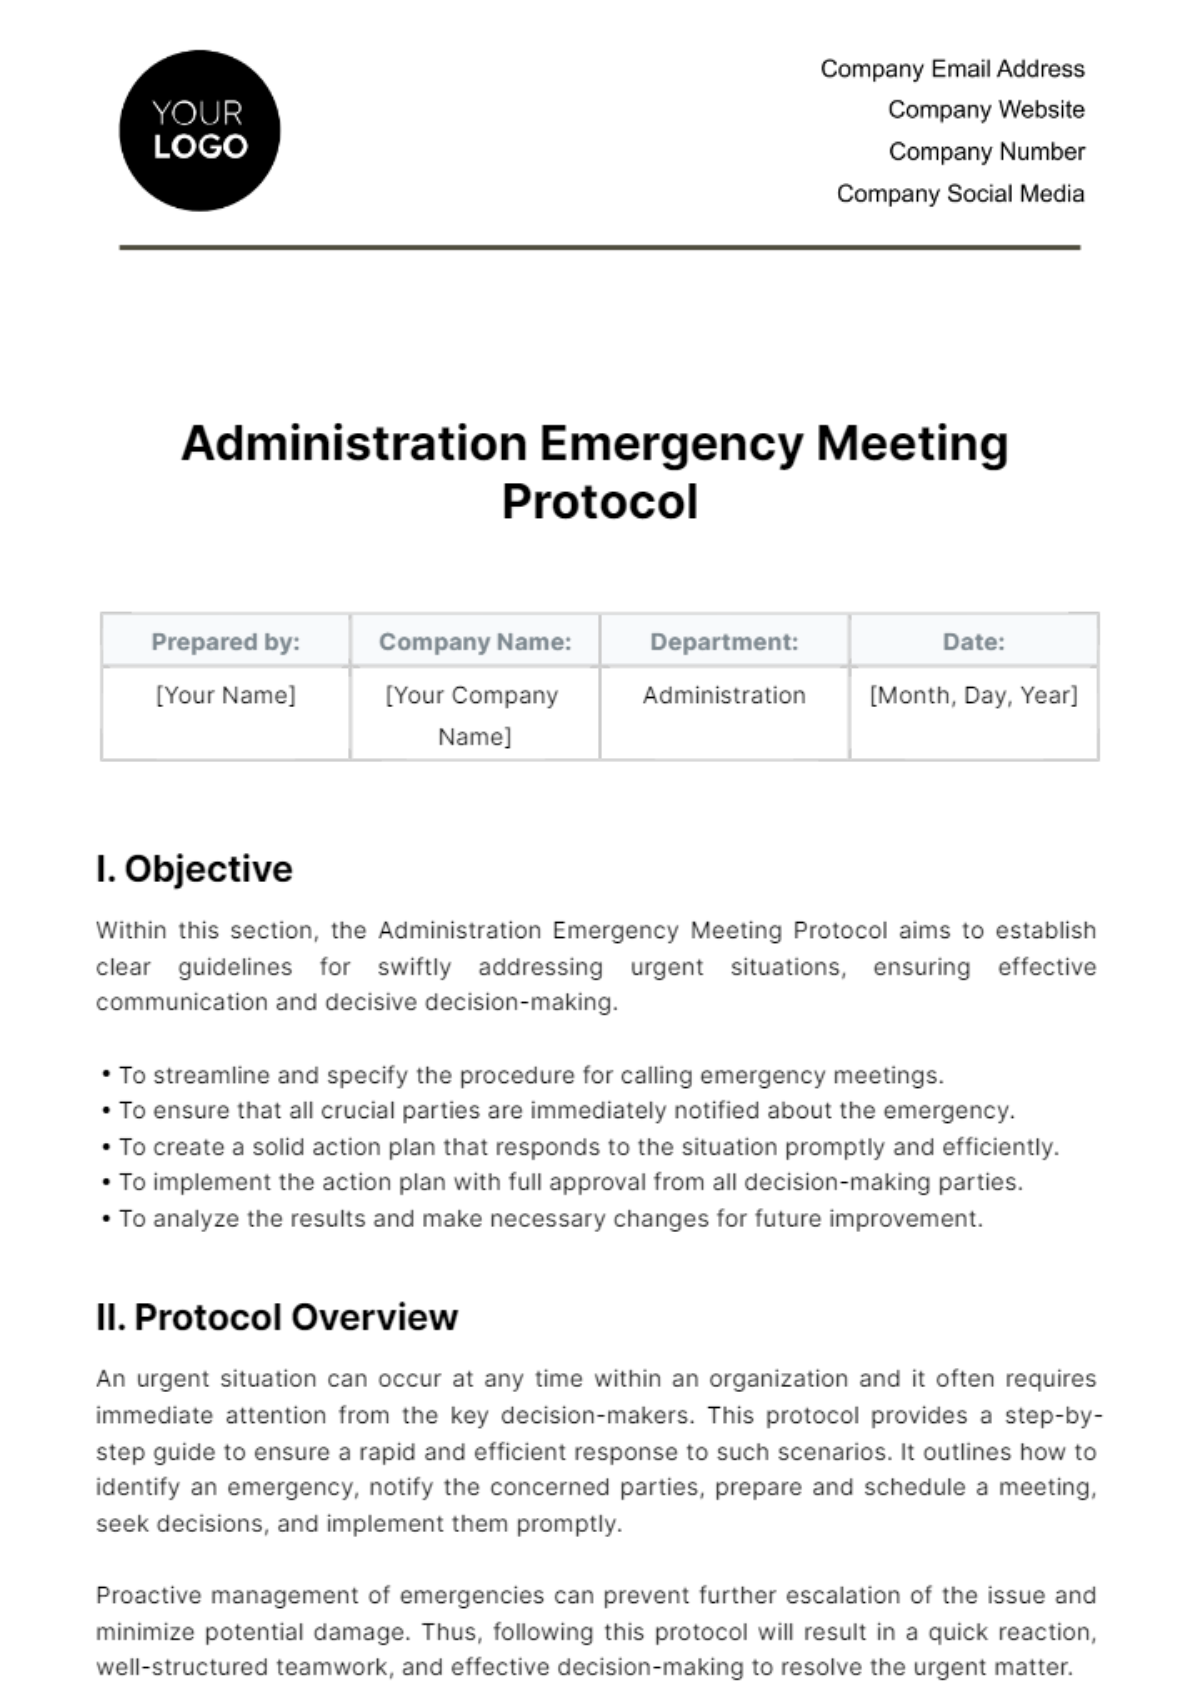 Free Administration Emergency Meeting Protocol Template